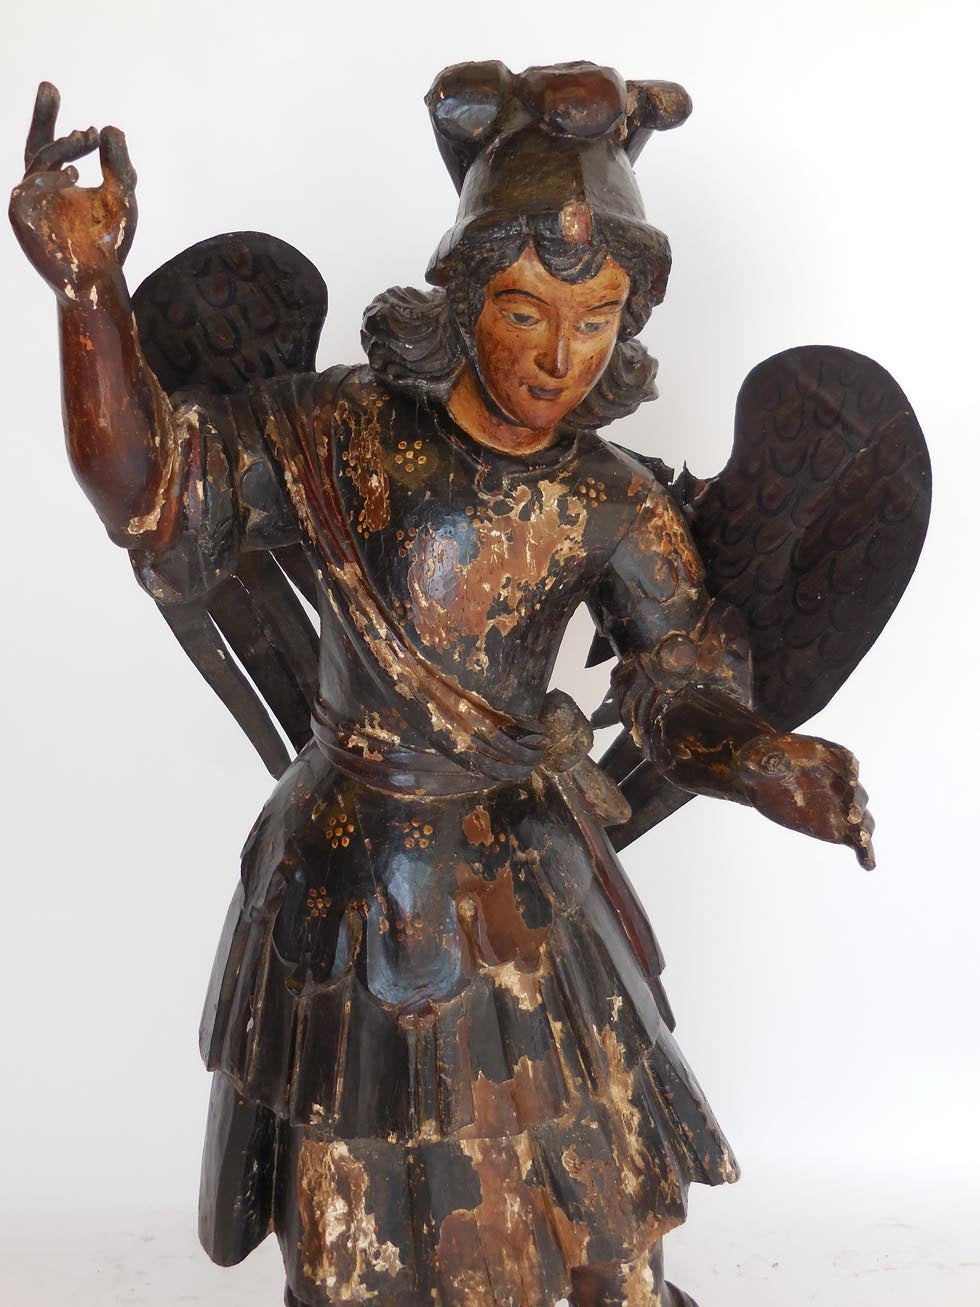 Large 18th century polychromed Saint Michael with tin wings. Beautiful facial features and hand-carved and hand-painted details throughout. San Miguel measures 43 inches high and he is atop a base that measures 17.5 x 8.